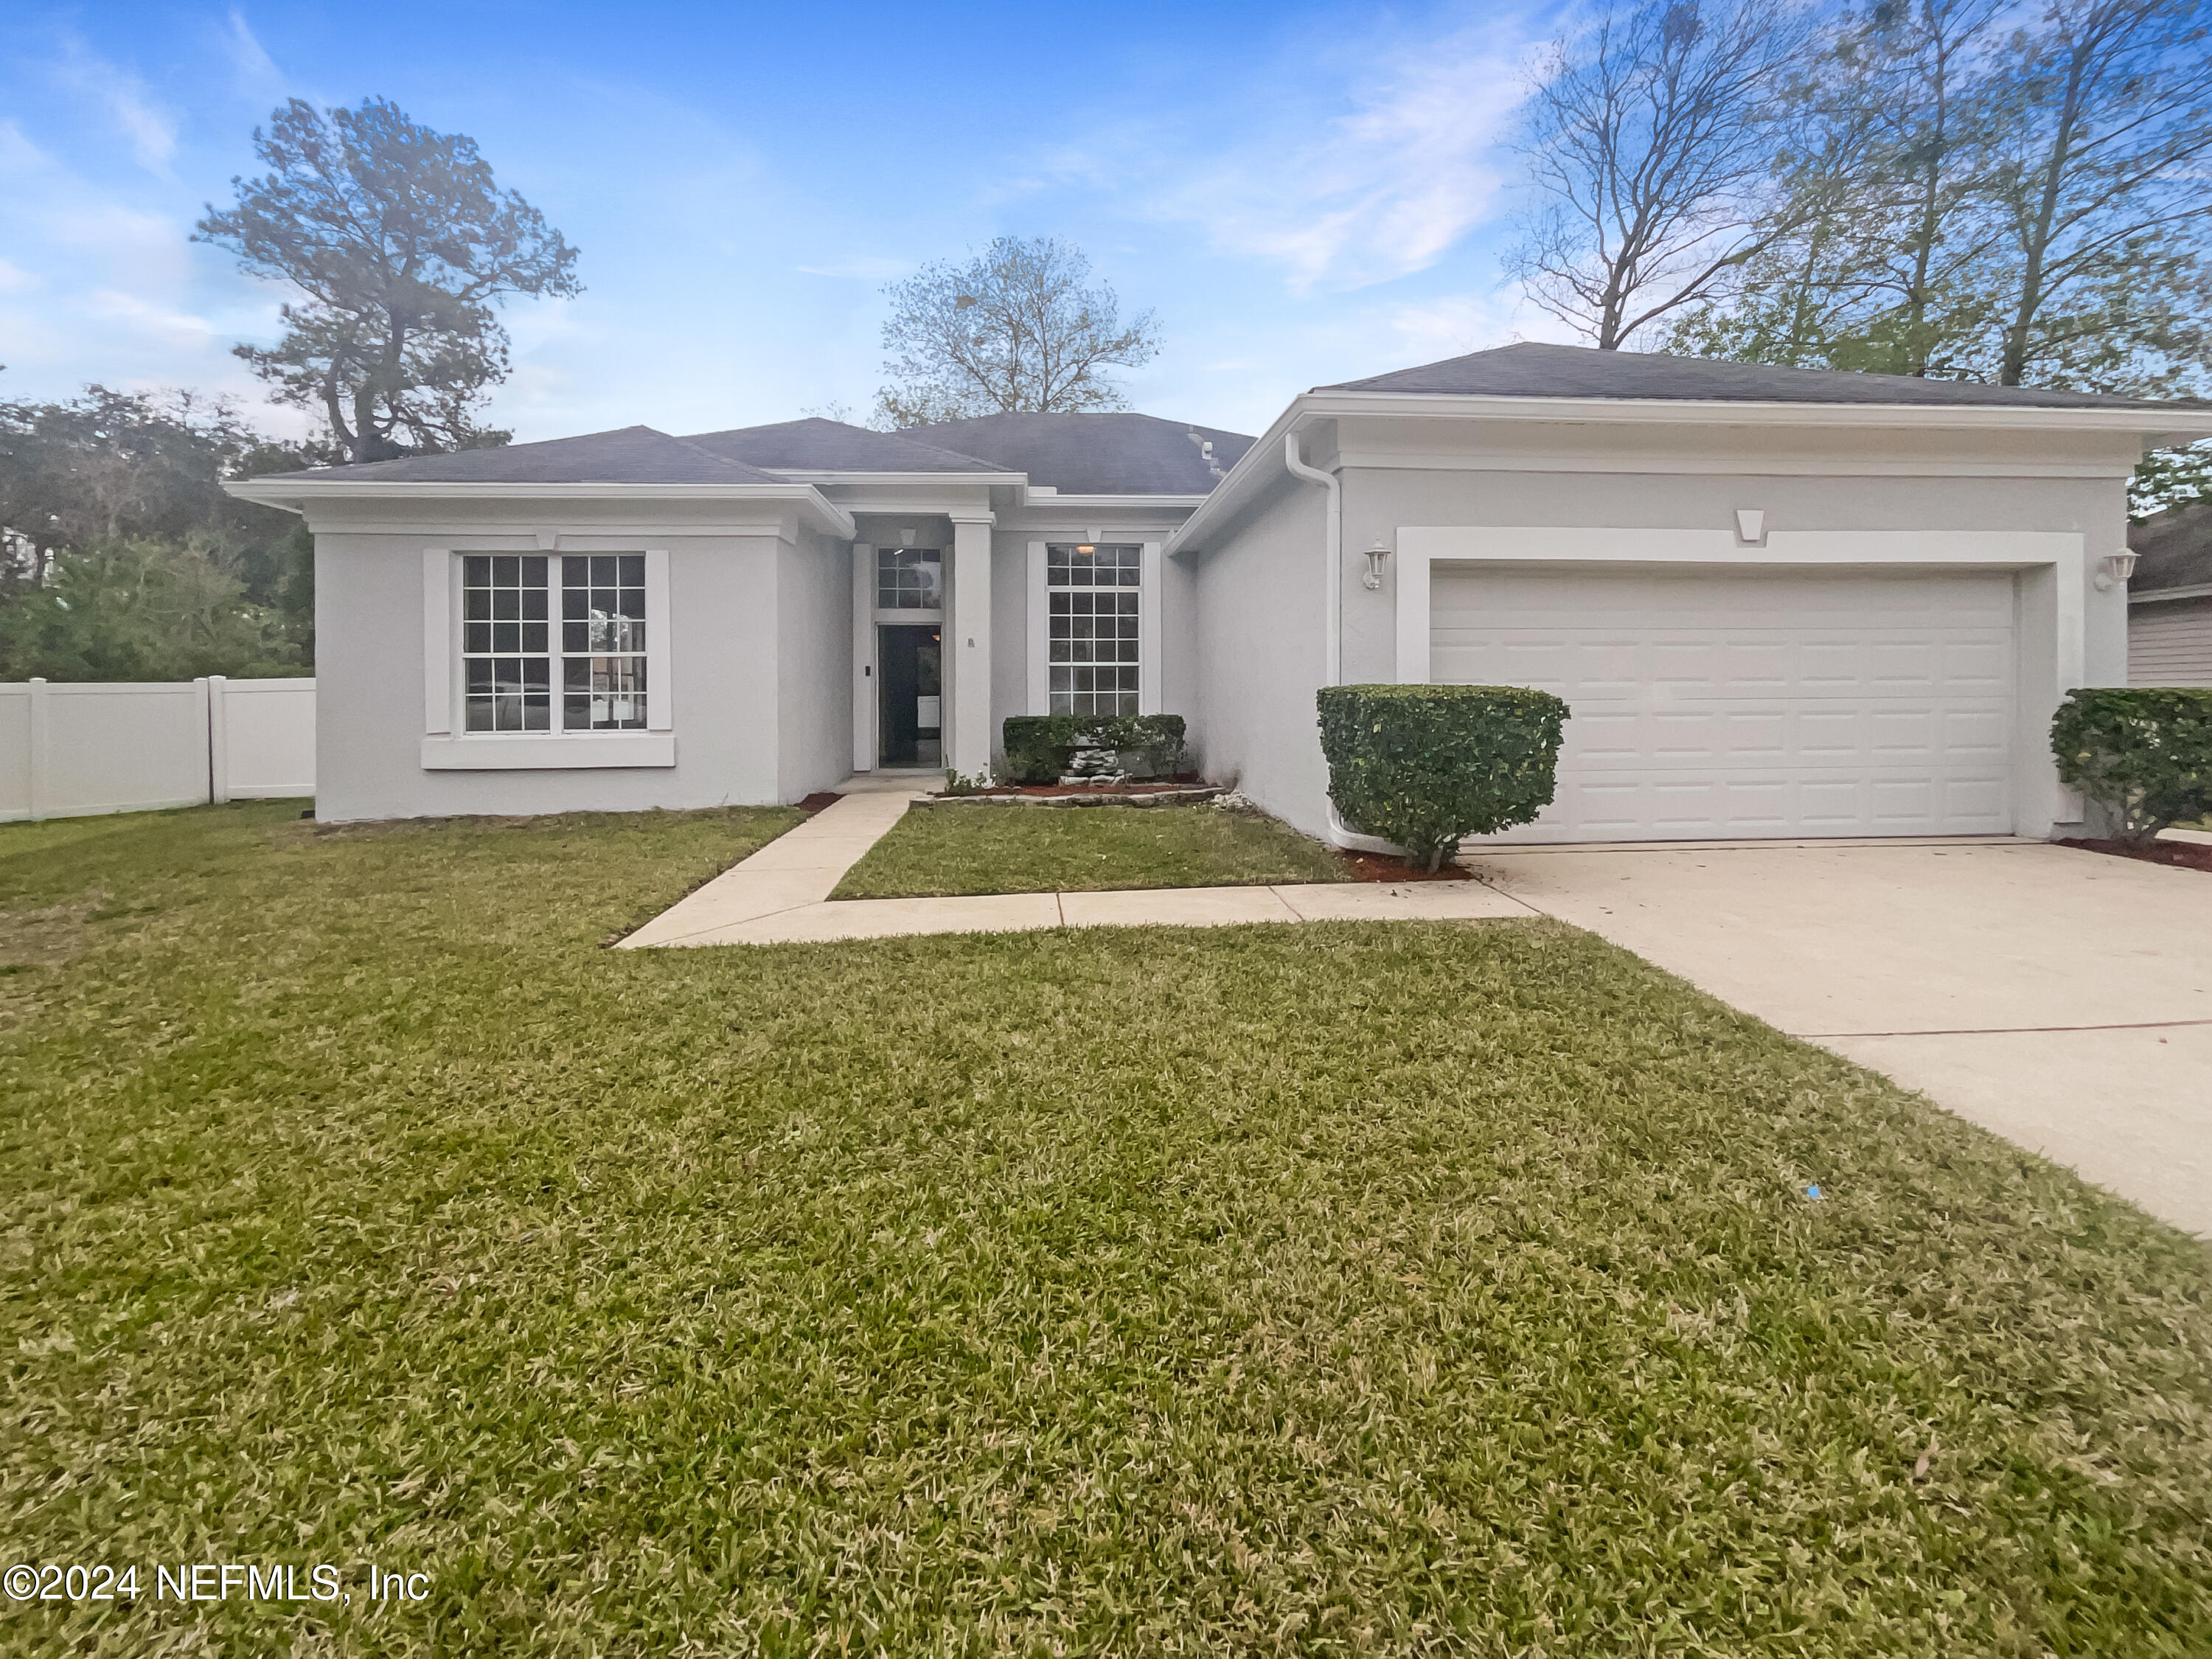 Jacksonville, FL home for sale located at 4631 Misty Dawn Court N, Jacksonville, FL 32277